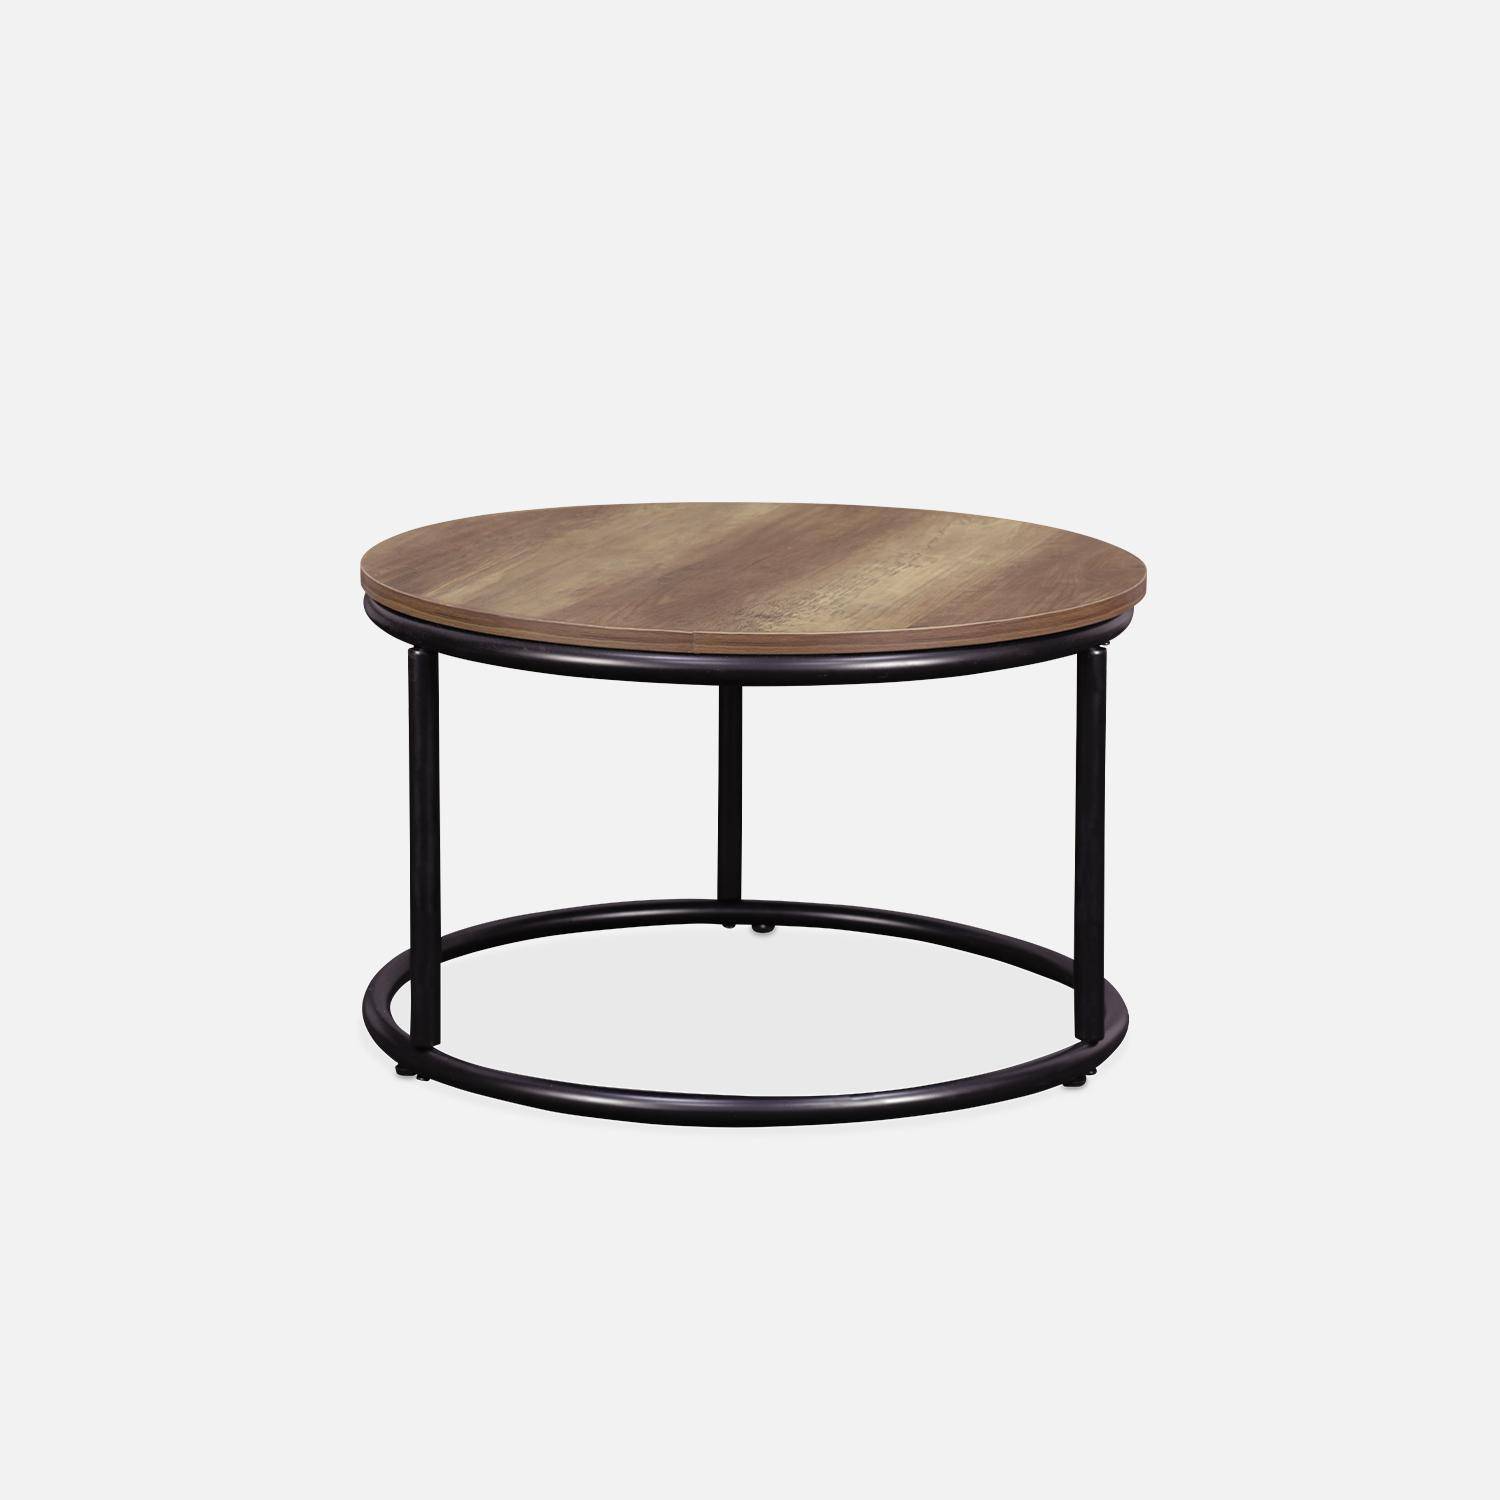 Pair of round, metal and wood-effect nesting coffee tables, 77x40x57cm - Loft,sweeek,Photo6